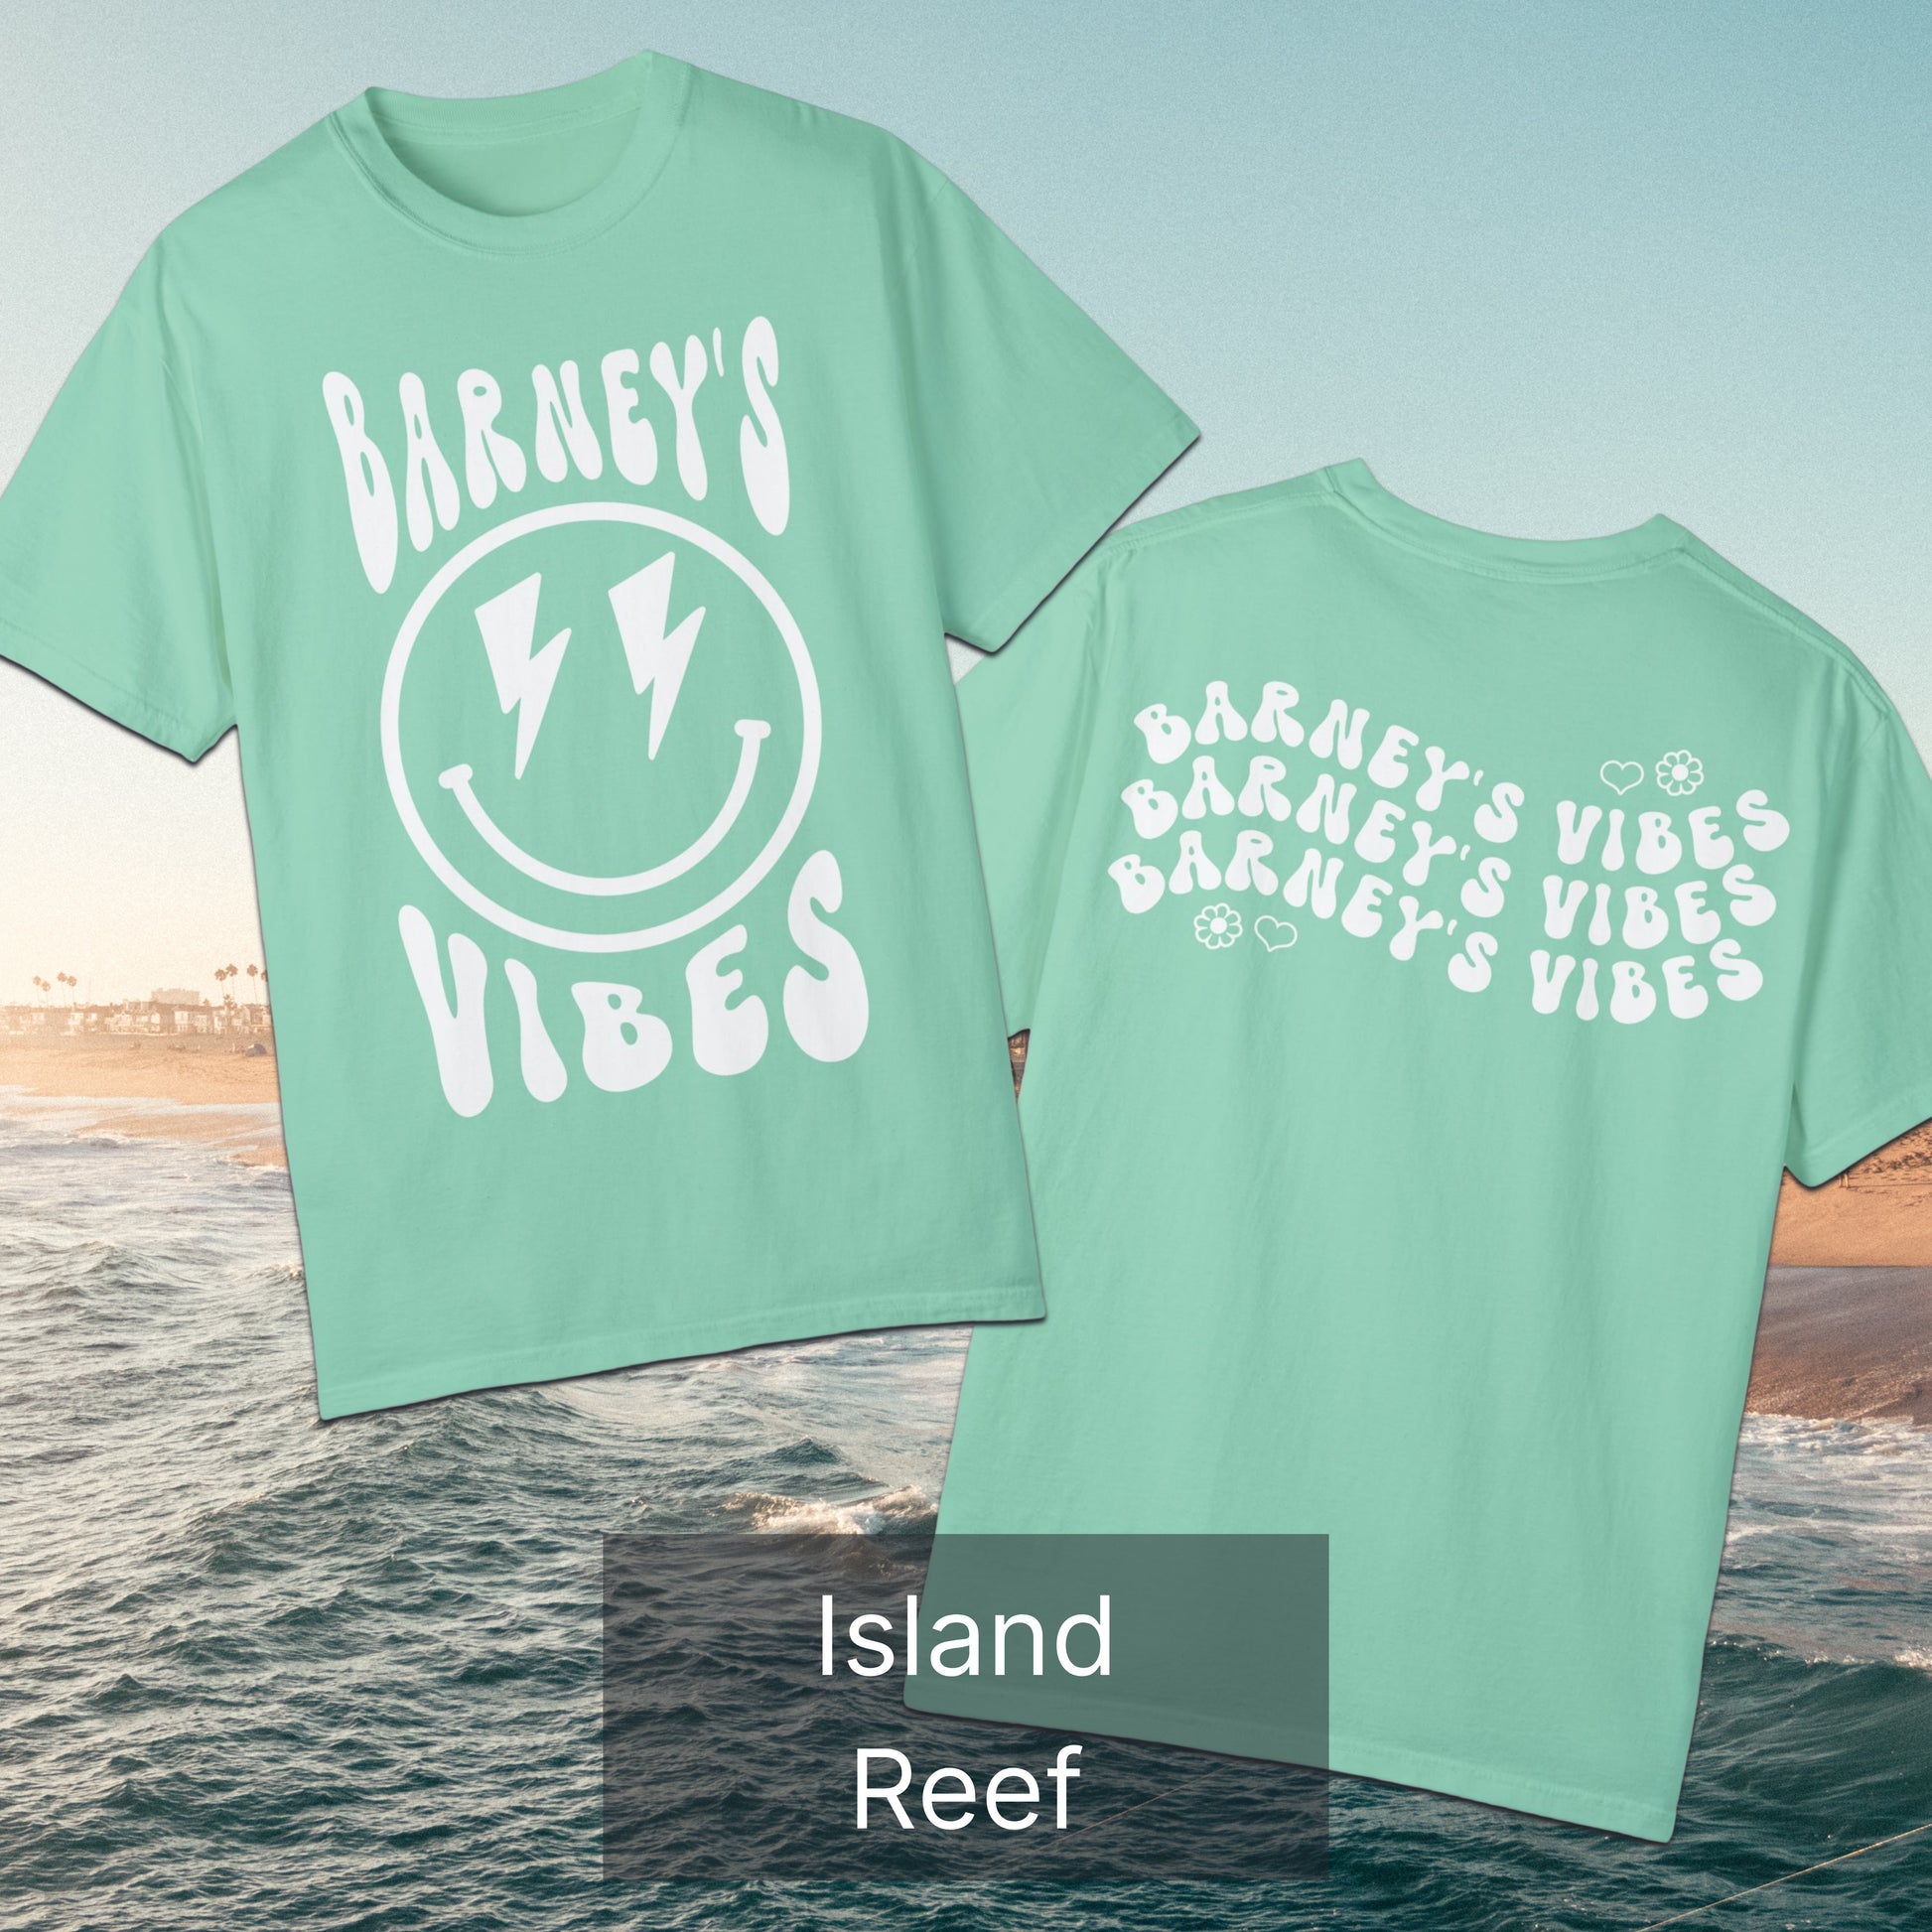 Barney's Vibes | BARNEY'S BEANERY - Women's Smiley Face Tee | White Graphics On Island Reef T-Shirt, Front And Back Flat Lay View